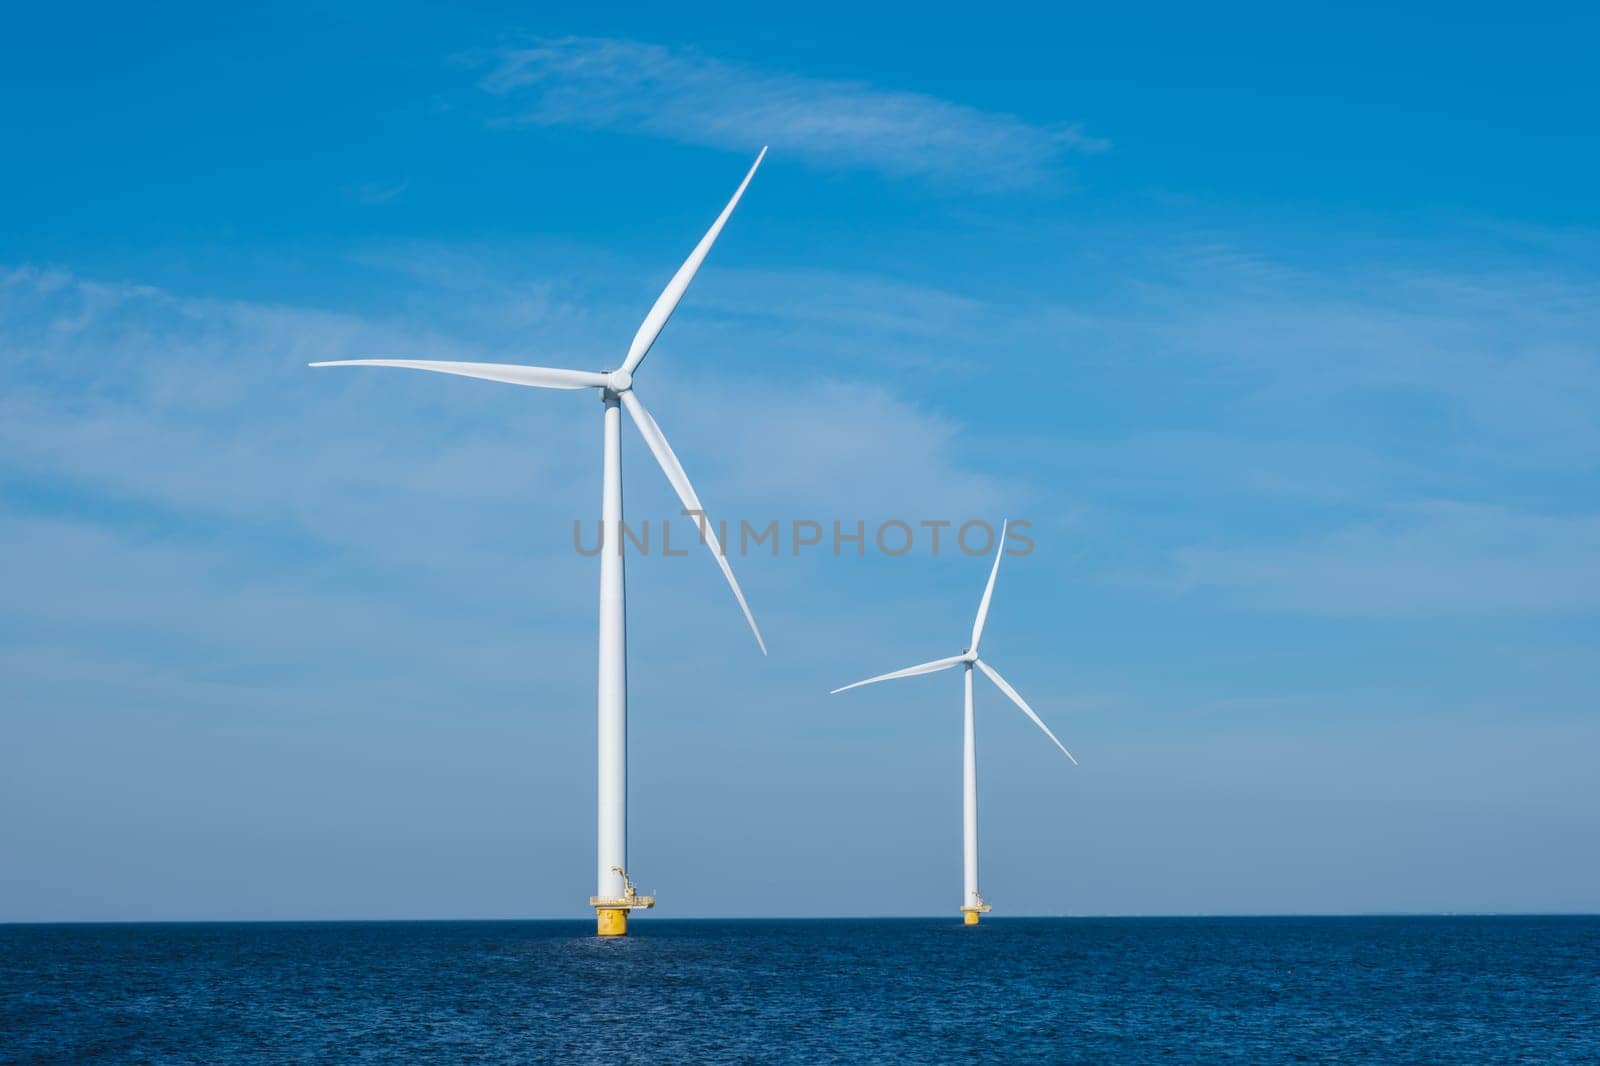 Three colossal wind turbines stand tall and majestic in the vast expanse of the ocean, harnessing the powerful energy of the wind to generate electricity by fokkebok